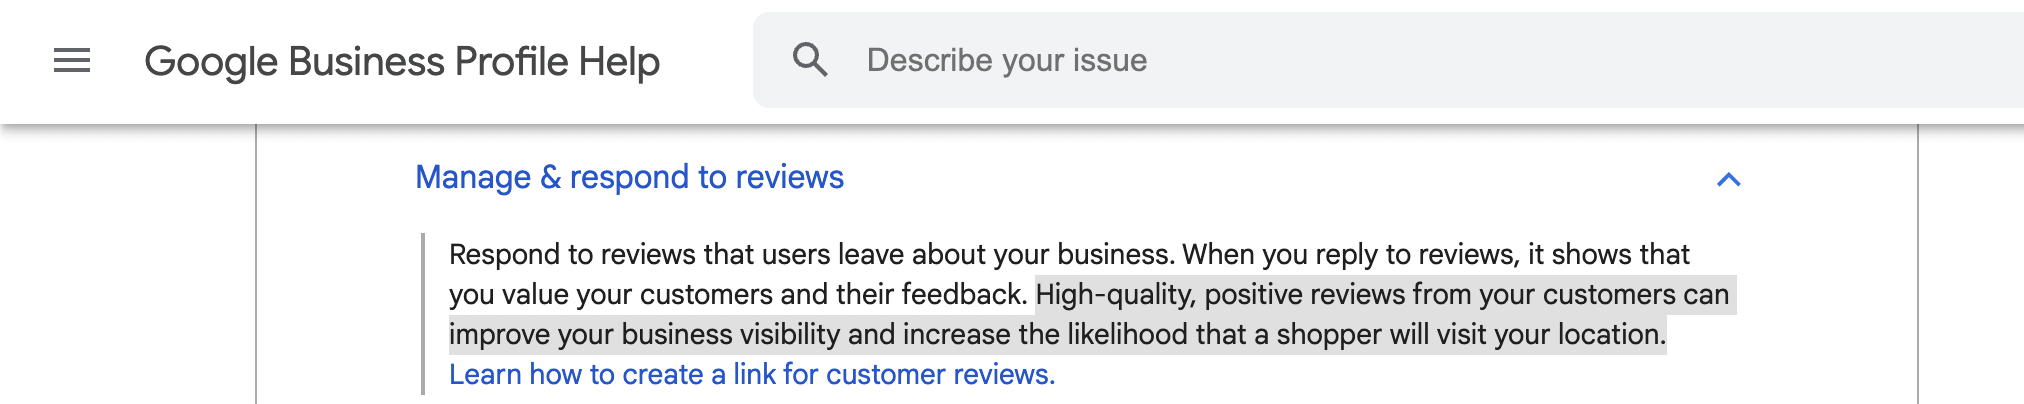 It is important to respond to reviews.